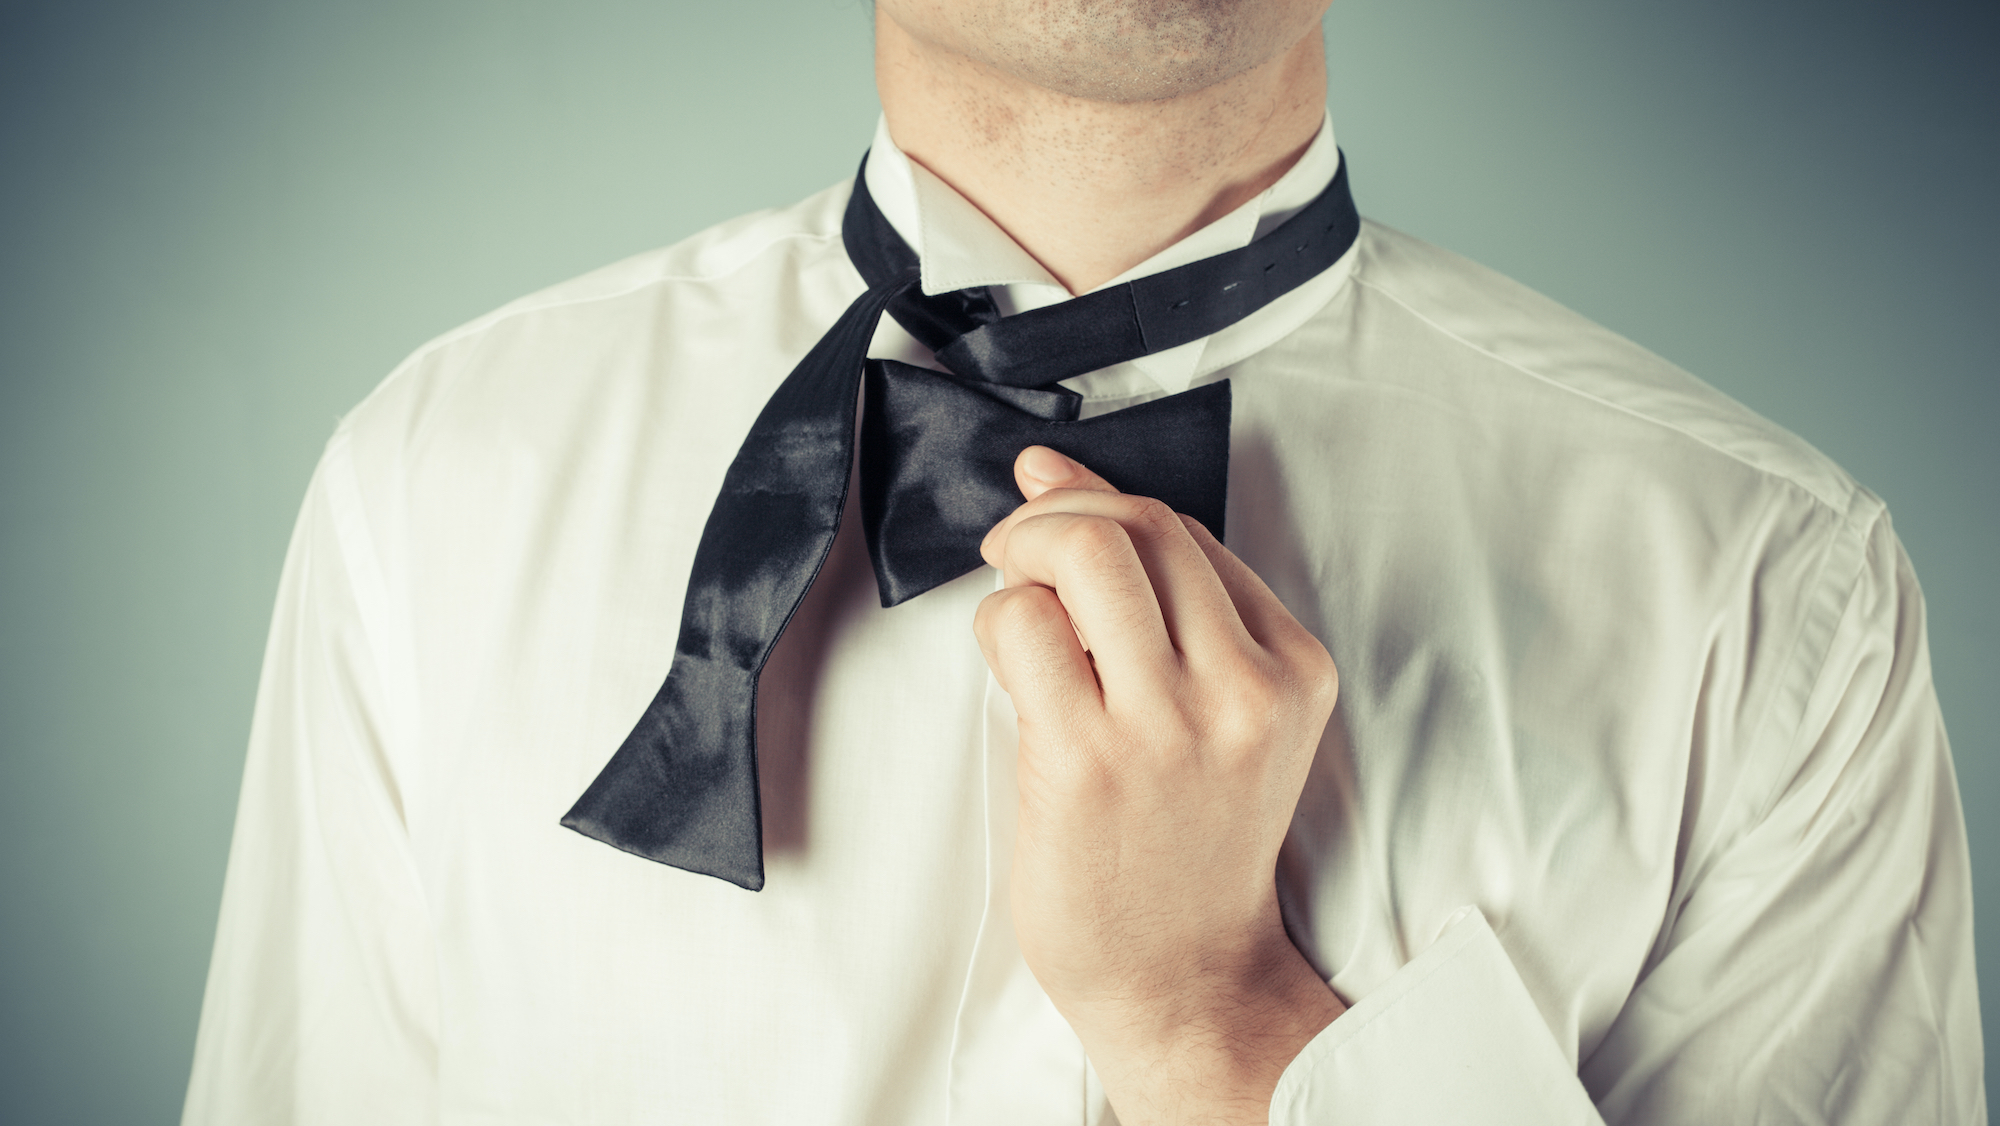 How to tie a bow tie - fold the shorter half and keep it level